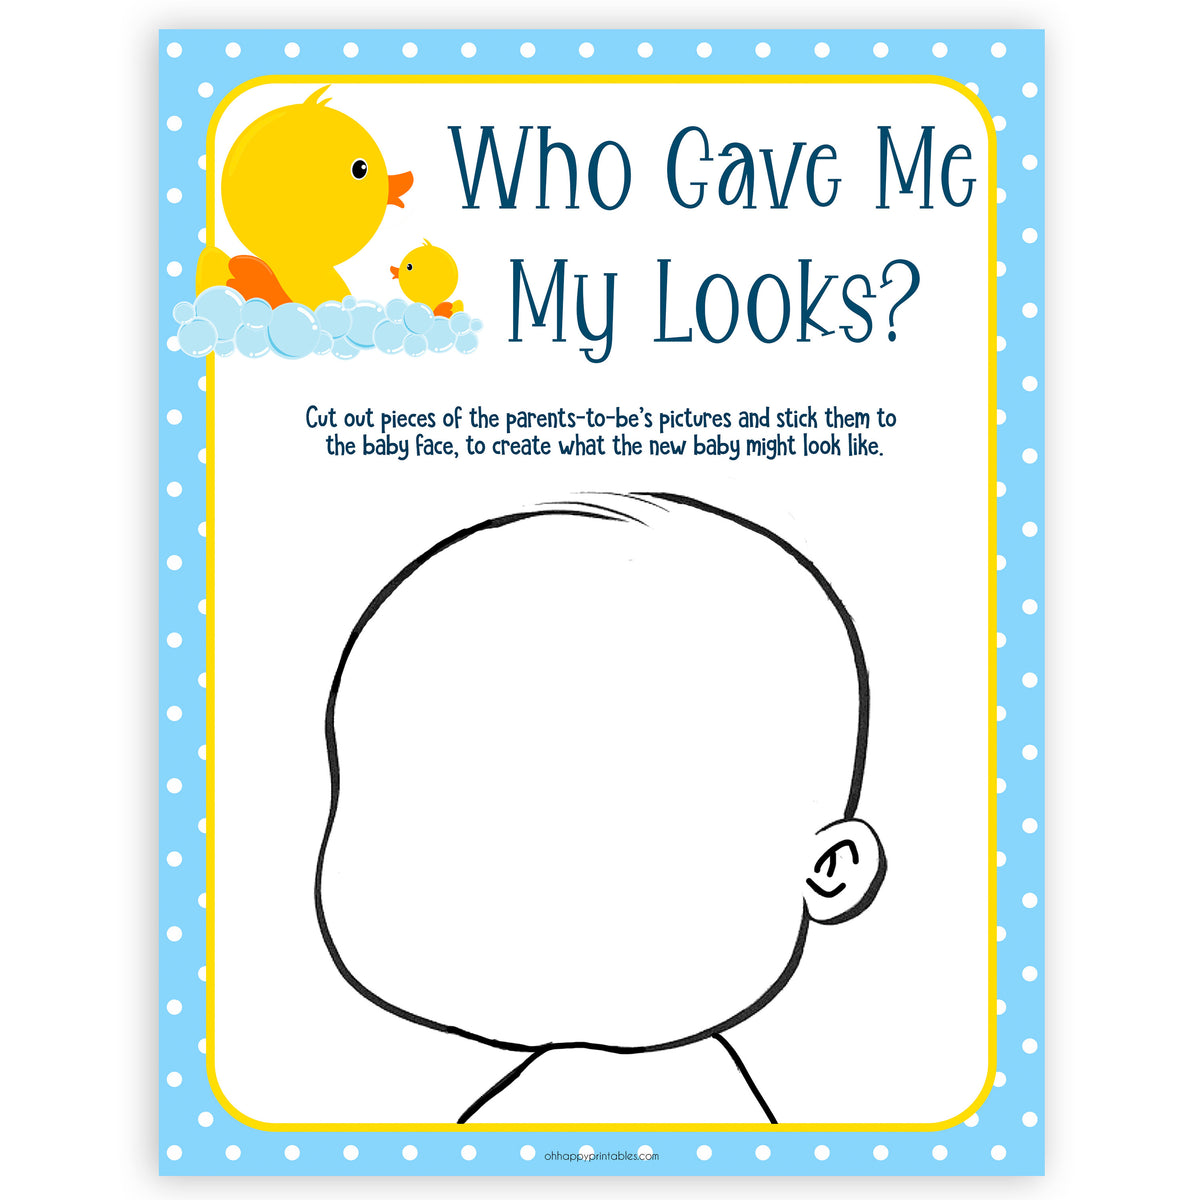 rubber ducky baby games, who gave me my looks, baby looks baby game, printable baby games, baby shower games, rubber ducky baby theme, fun baby games, popular baby games